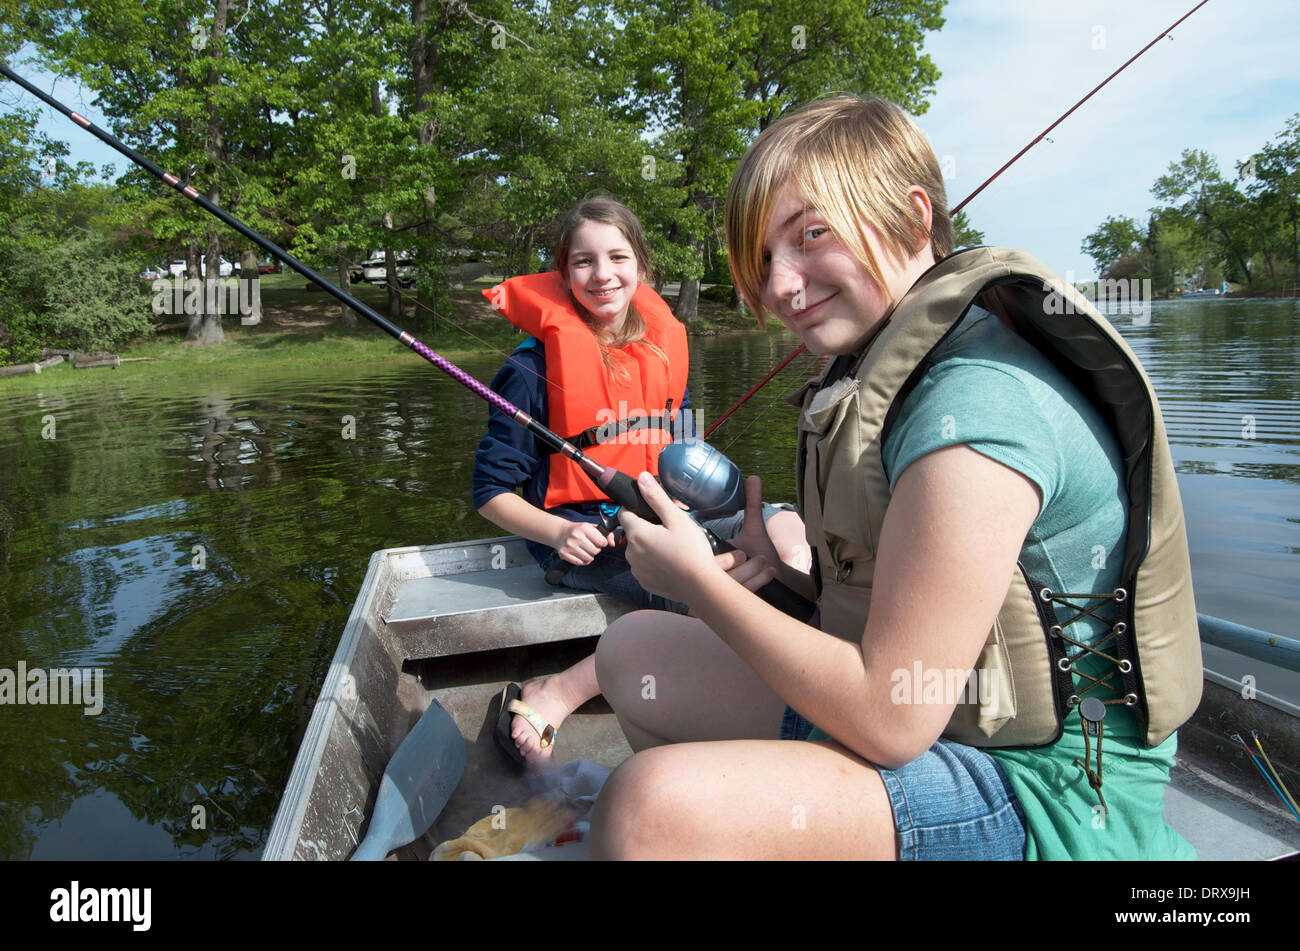 Two girls fishing on a boat wearing life jackets Stock Photo